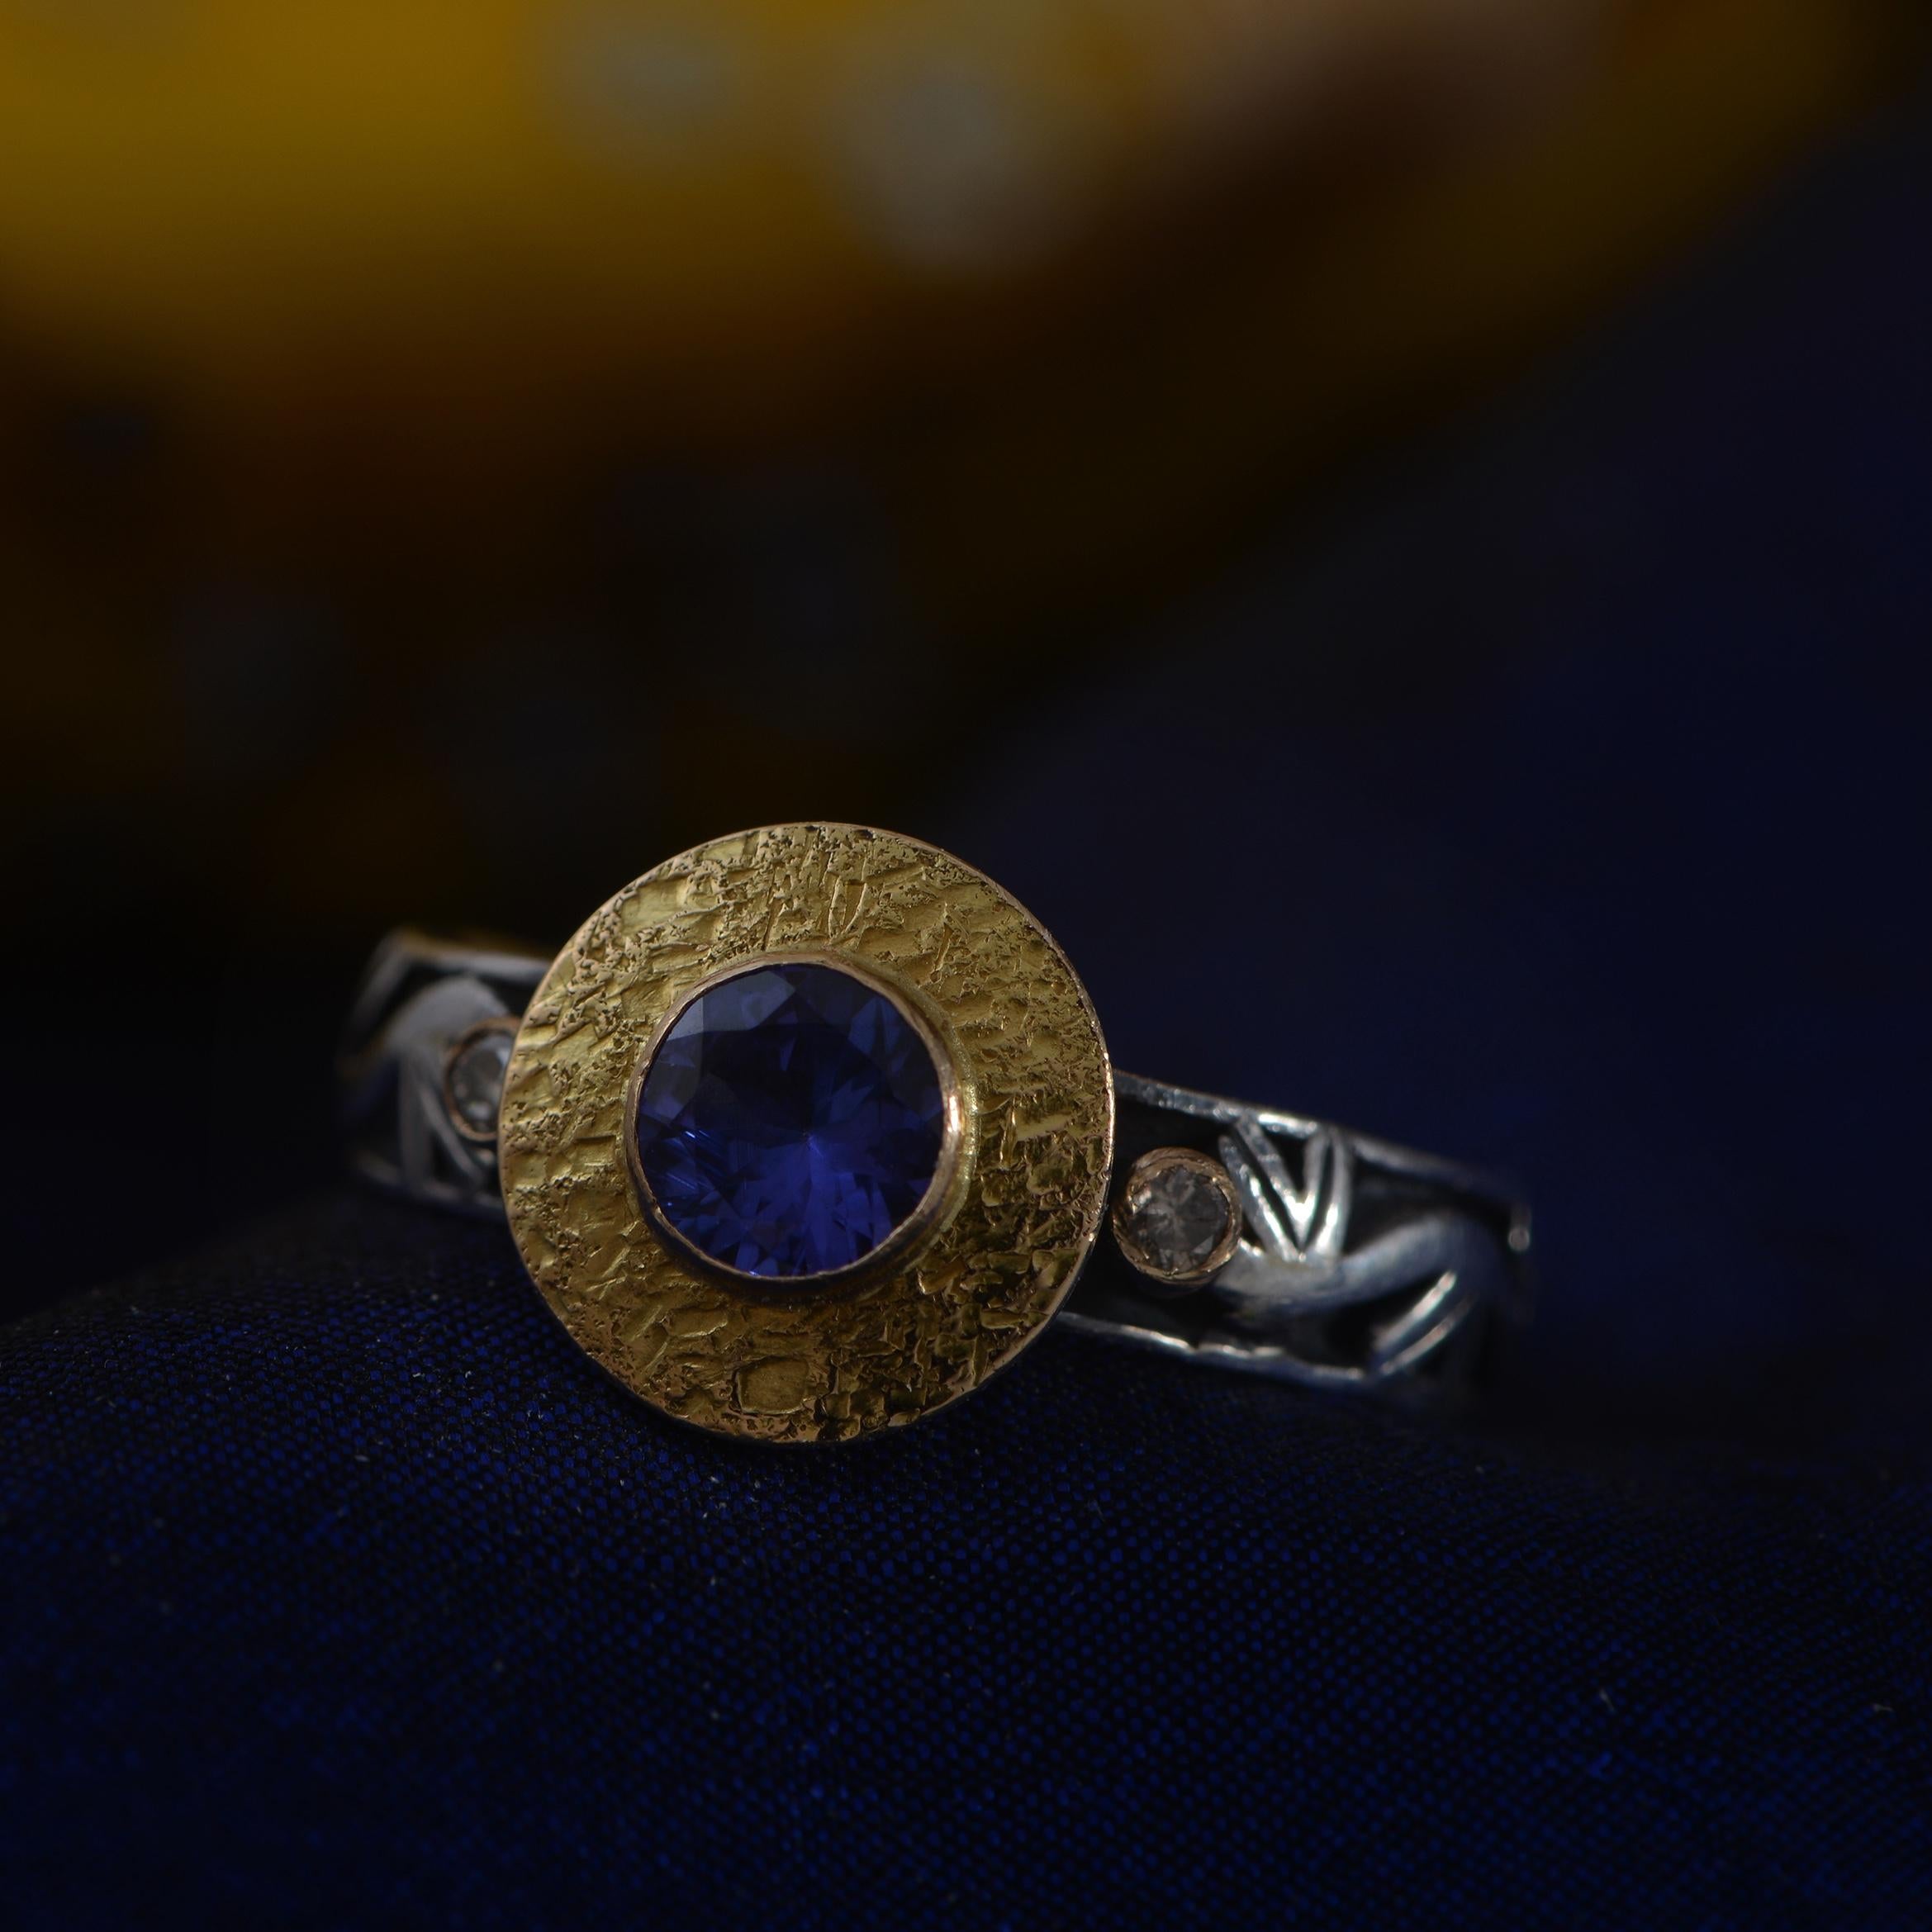 This lovely tanzanite ring is one-of-a-kind. Handmade in our workshops, it features a central tanzanite which is set in 18k gold, and flanked by two full cut diamonds, which are also set in 18k gold. The shank is made of oxidized sterling silver,